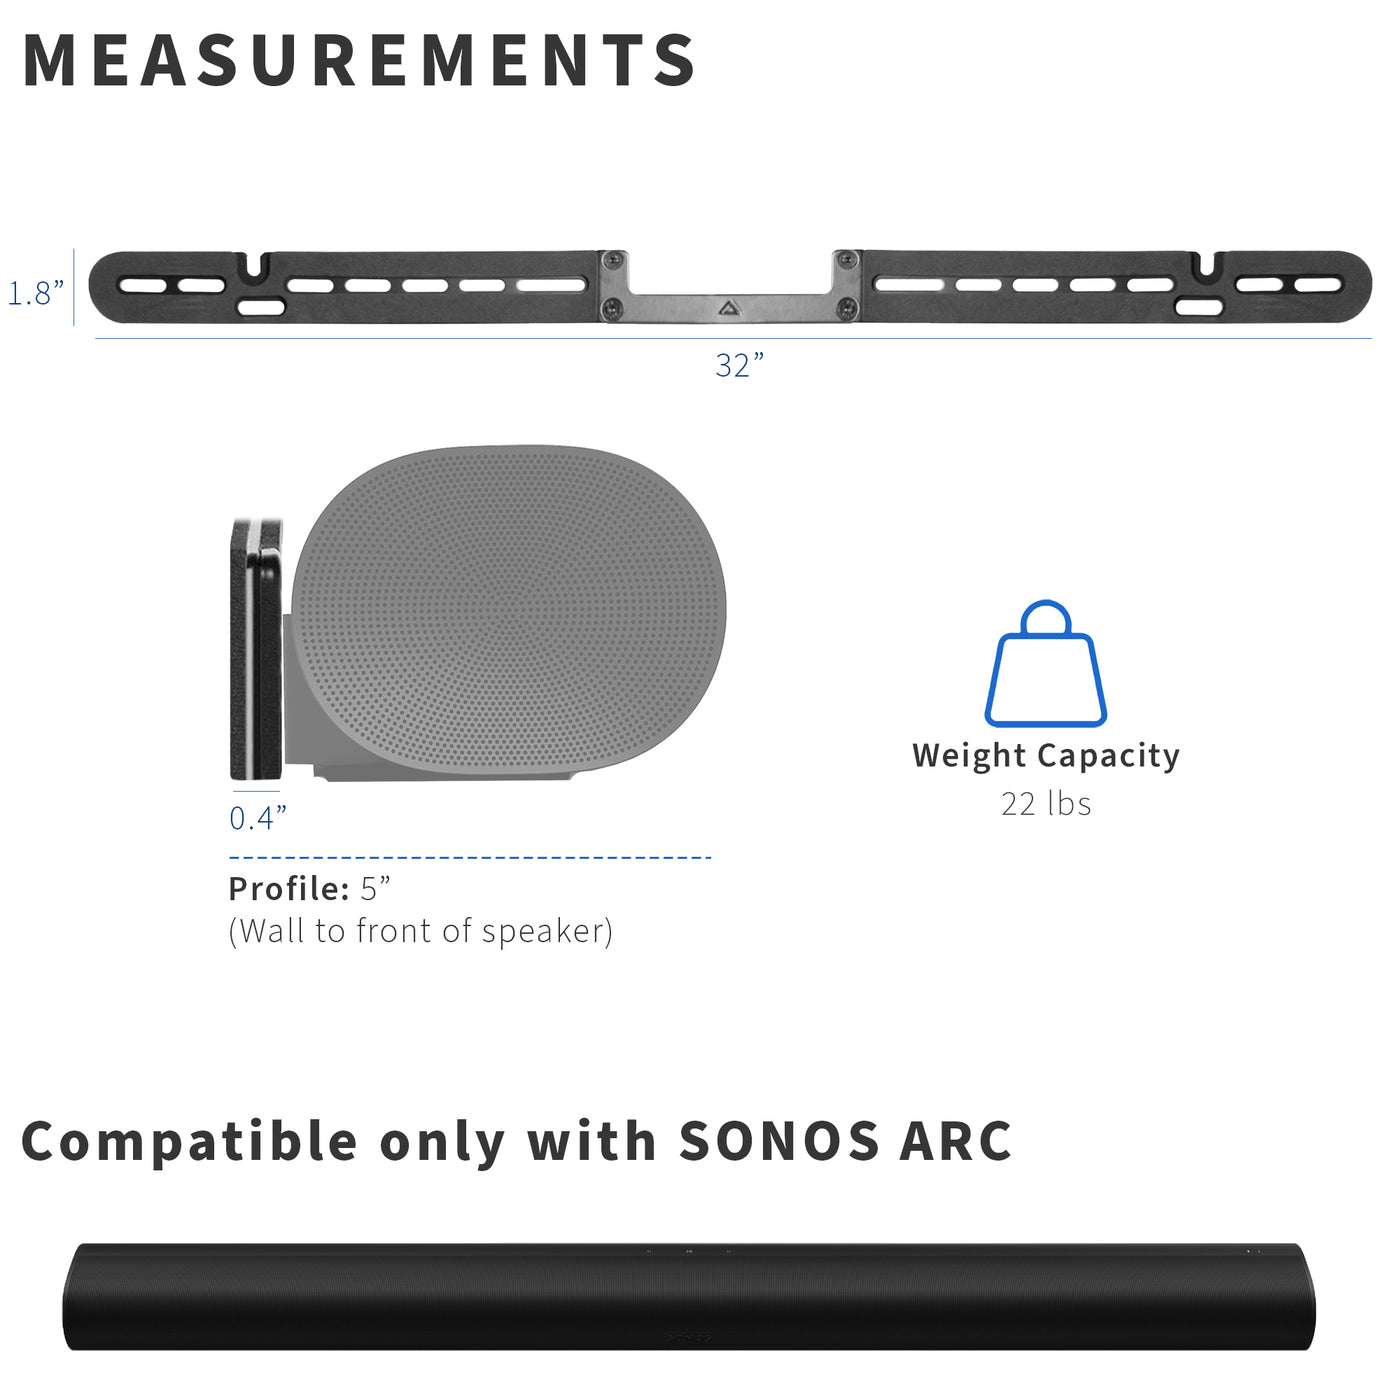 Wall Mount Sonos Arc Soundbar – - desk solutions, mounting, and more